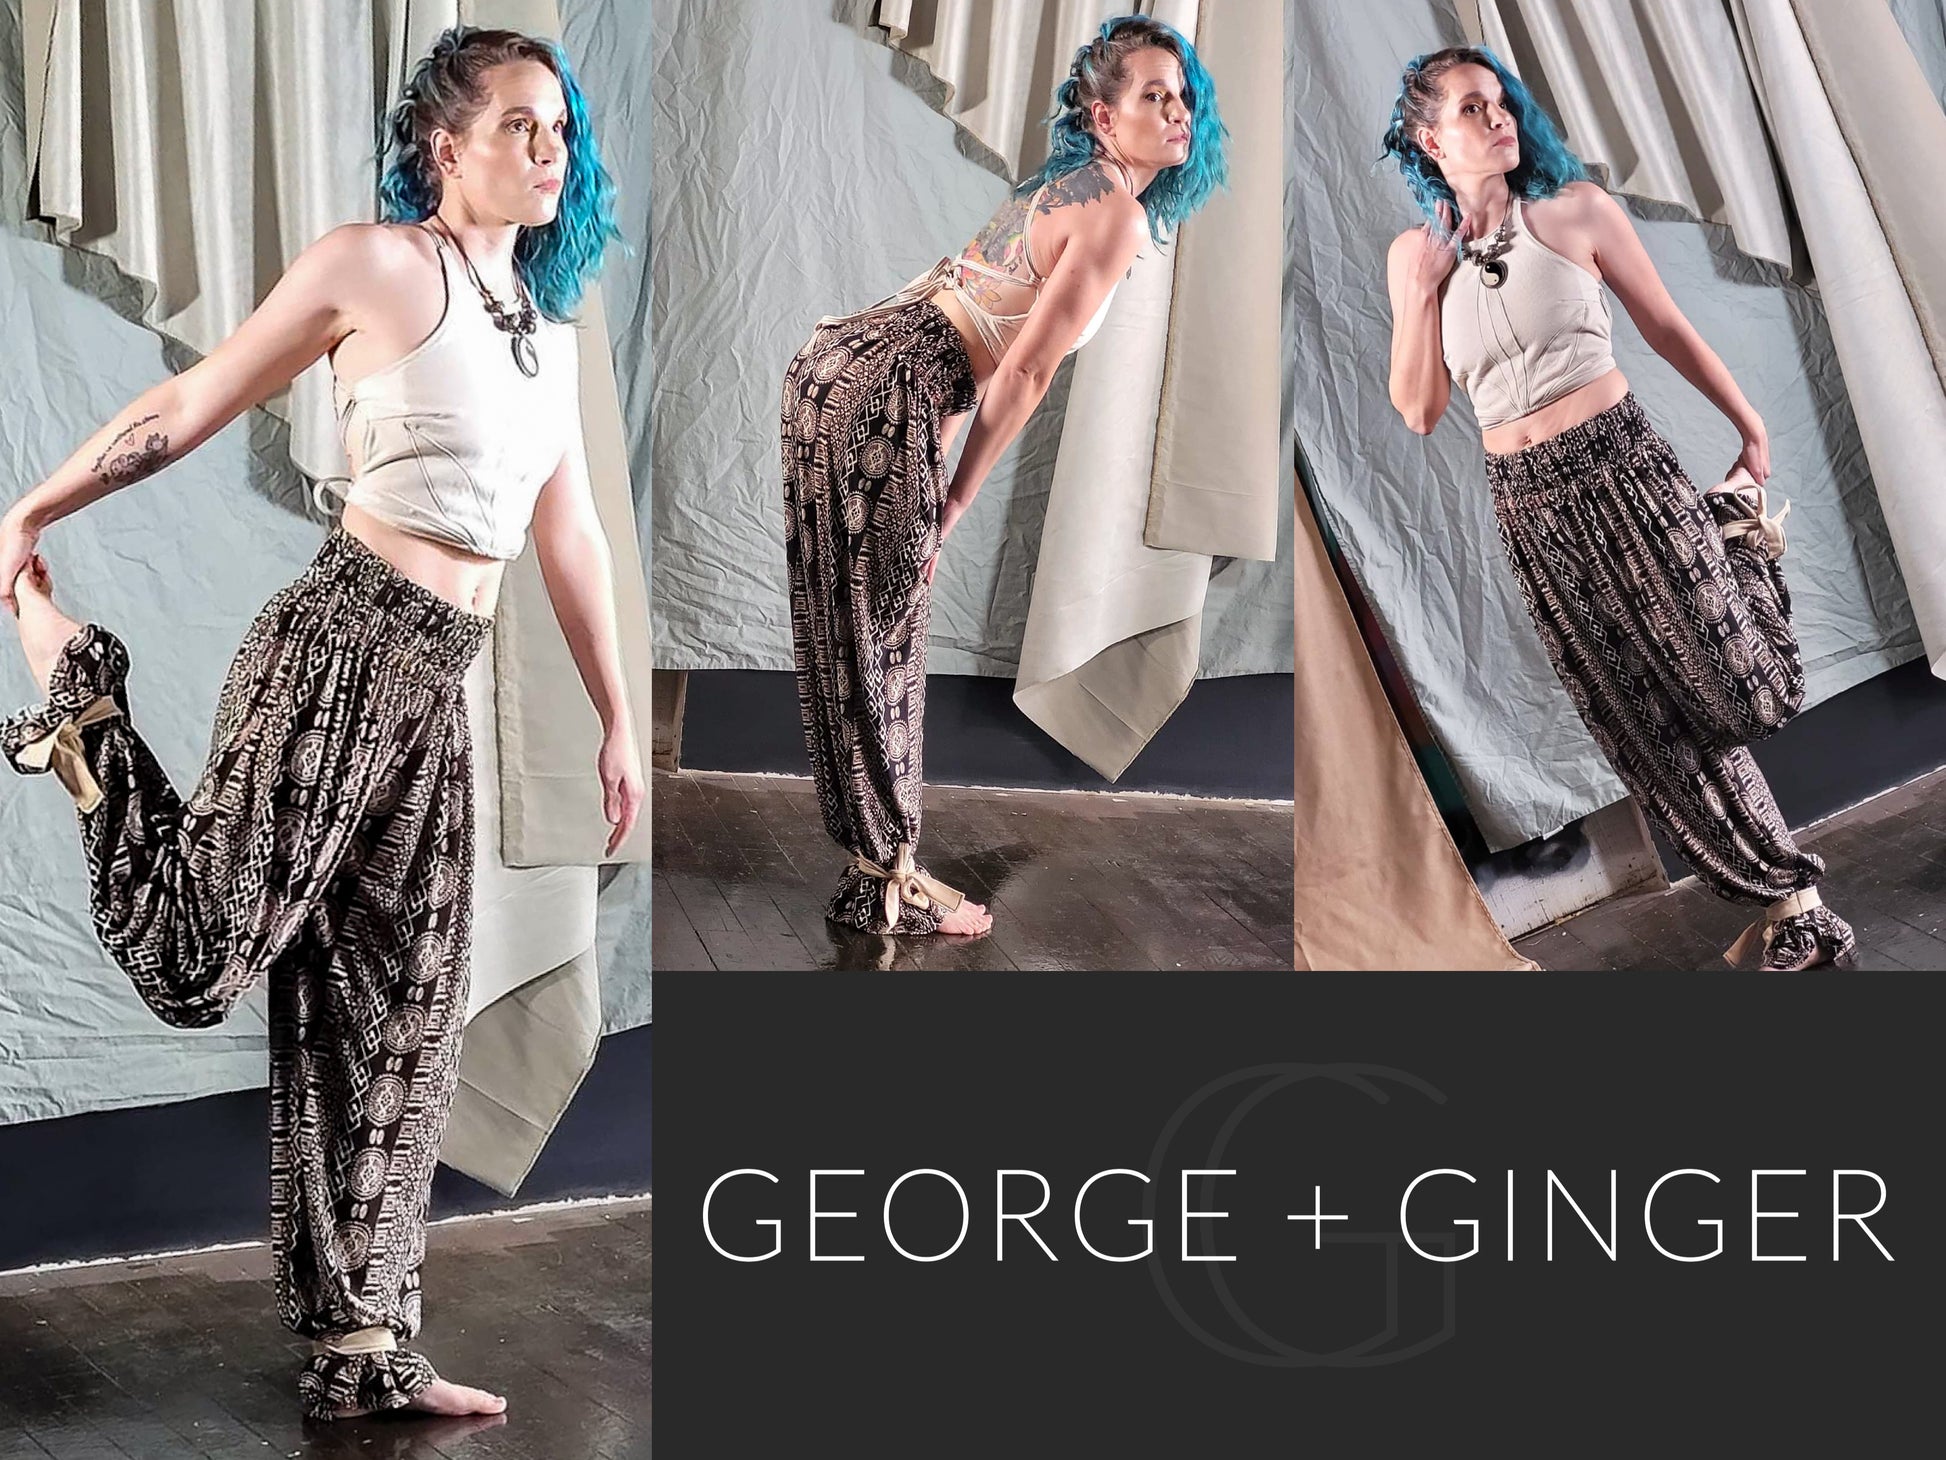 The Puff Pants PDF Sewing Pattern – George And Ginger Patterns